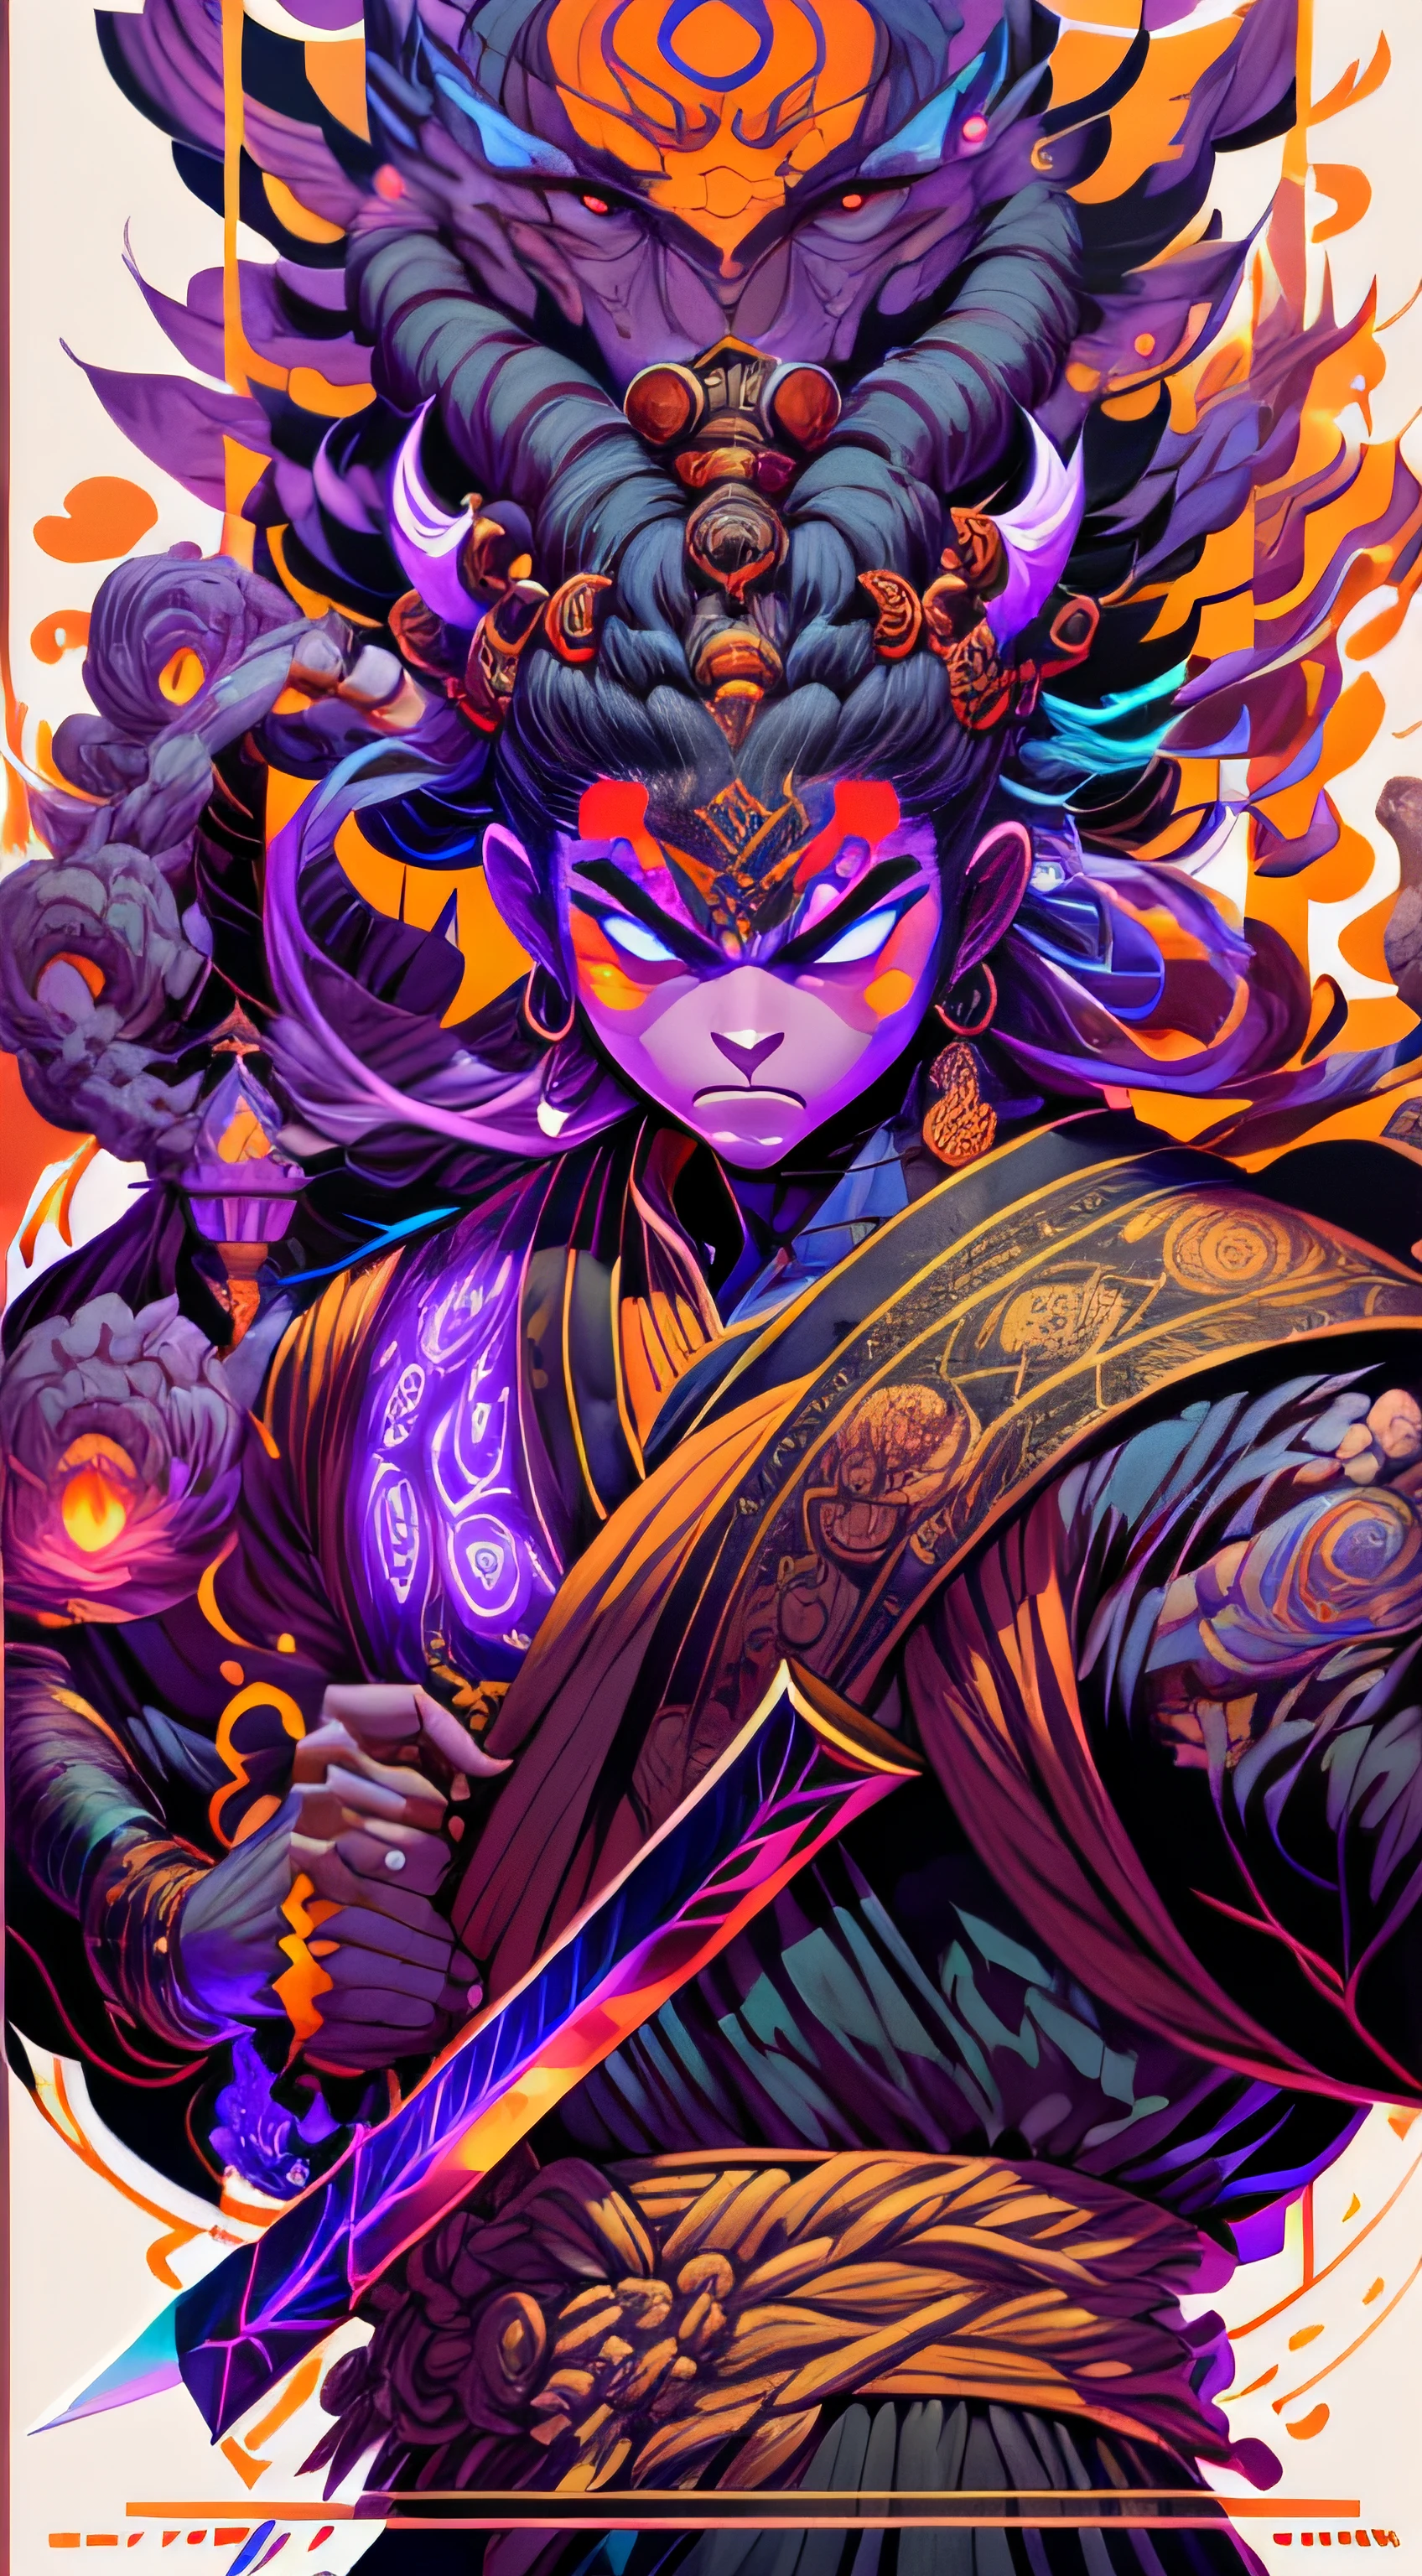 Craft an exquisite, high-resolution 4K masterpiece that encapsulates a full-body wide shot of a poster featuring an Oni face. The piece should be intricately detailed, inspired by the techniques of renowned artists such as Ryan Yee, Sachin Teng, JC Leyendecker, Jen Bartel, Beeple, and James Jean, with a particular emphasis on Sachin Teng's style. 

The artwork should reflect the aesthetic of Shin Hanga, a winner of the Behance contest, and should achieve perfect symmetry. The subject of the portrait is Akuma, complete with Oni horns. The atmosphere should be ethereal, with smoke, white light, and strong light elements. 

Incorporate elements of surrealism into the piece, with ultra-detailed features and glowing eyes. The full-body shot should also include a close-up of the body, with Akuma holding weapons - a katana and a double dragon winding. 

The color palette should be dominated by a mesmerizing blue light, and a bracer should be part of the attire. The piece should be available in HD, Ultra HD, and 4K resolutions. Finally, to add a dramatic effect, include a thunderous backdrop to the scene, creating a surreal and captivating masterpiece.